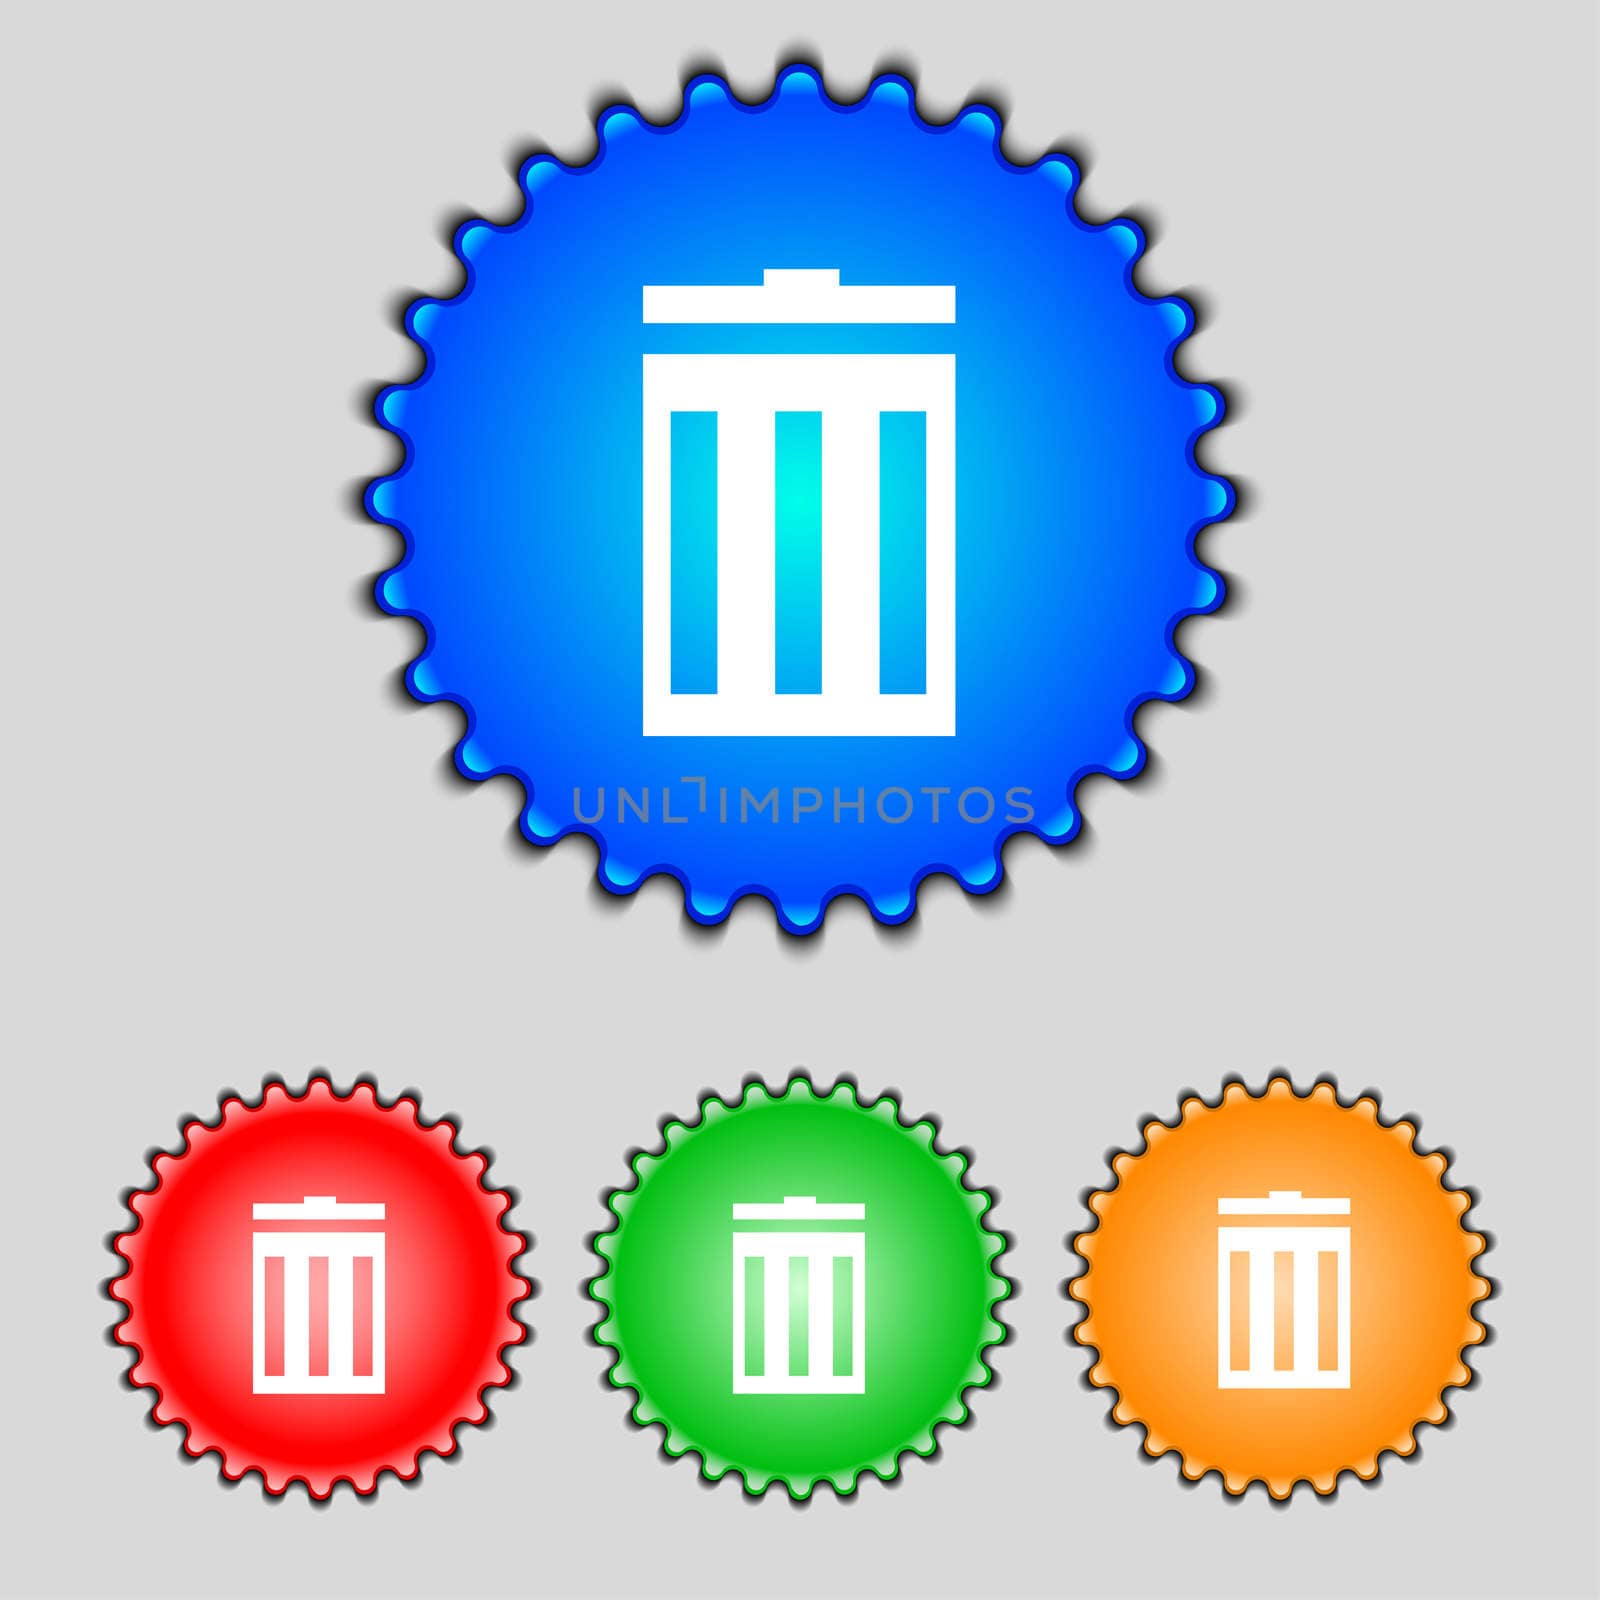 Recycle bin sign icon. Symbol. Set of colored buttons. illustration